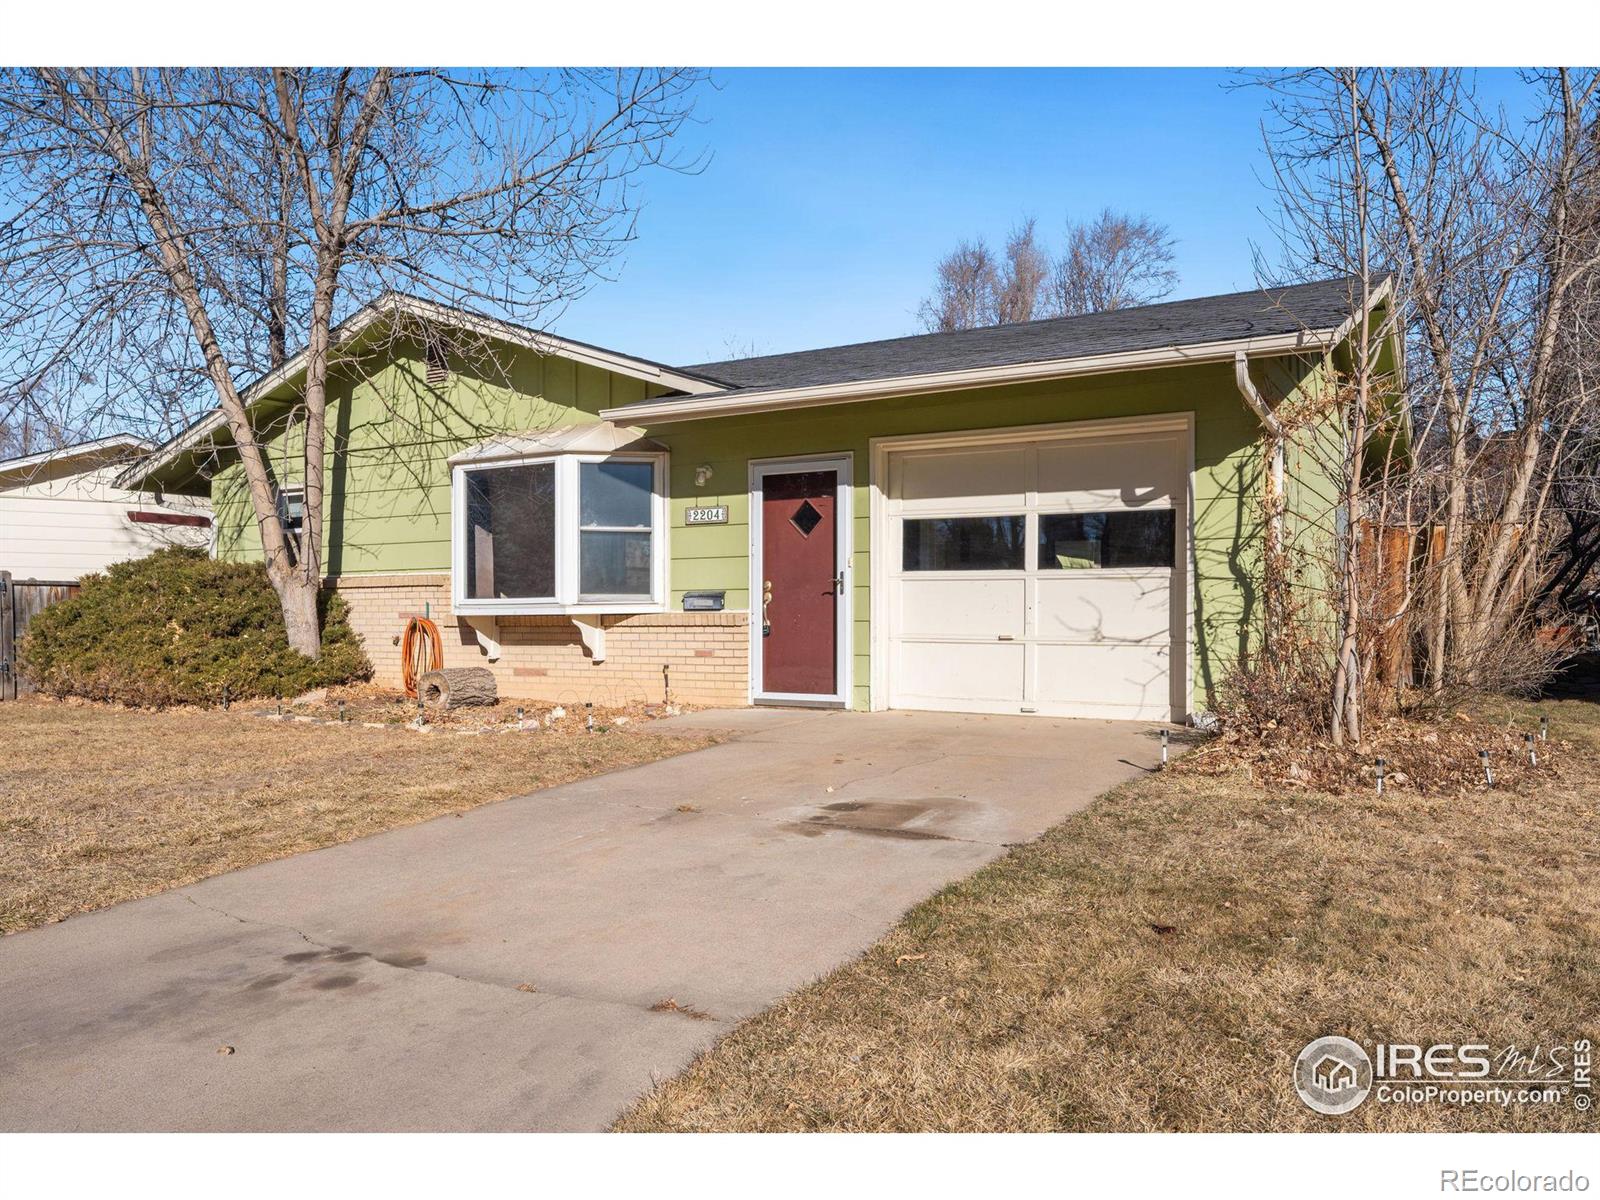 Report Image for 2204  Clearview Avenue,Fort Collins, Colorado